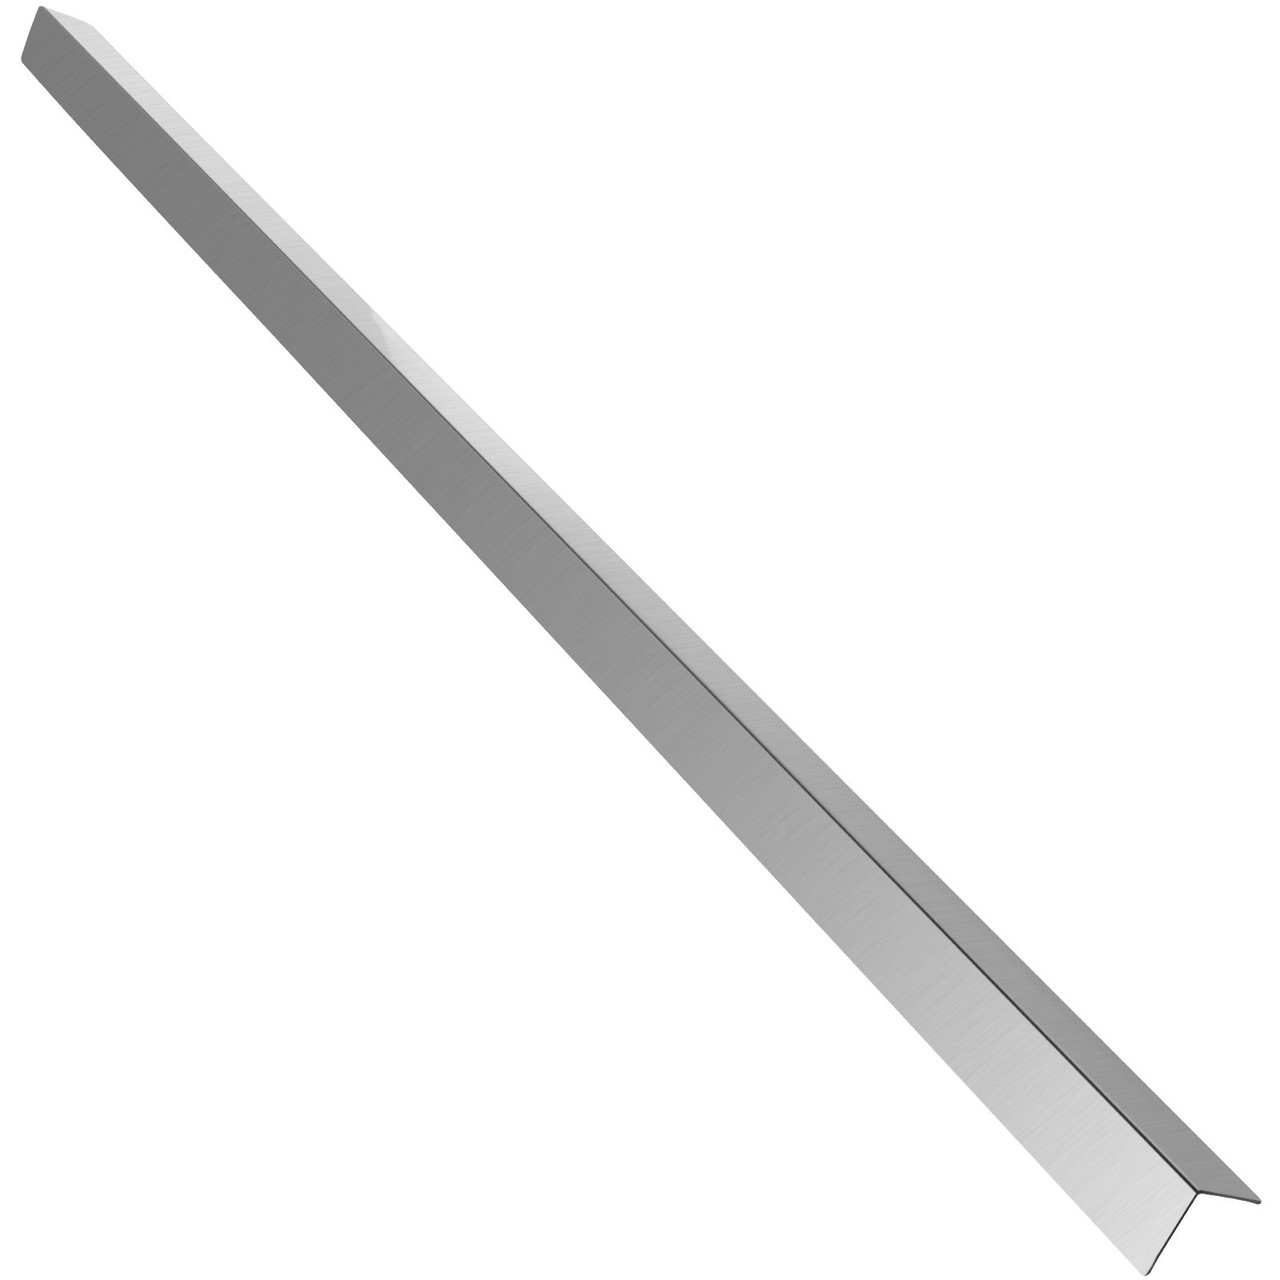 Stainless Steel Corner Guards 1 x 1 x 48 inch Metal Wall Corner Protector, Pack of 20 Corner Guards, 20 Ga 304 Stainless Corner Guard with 90-Degree Angle for Wall Protection and Decoration